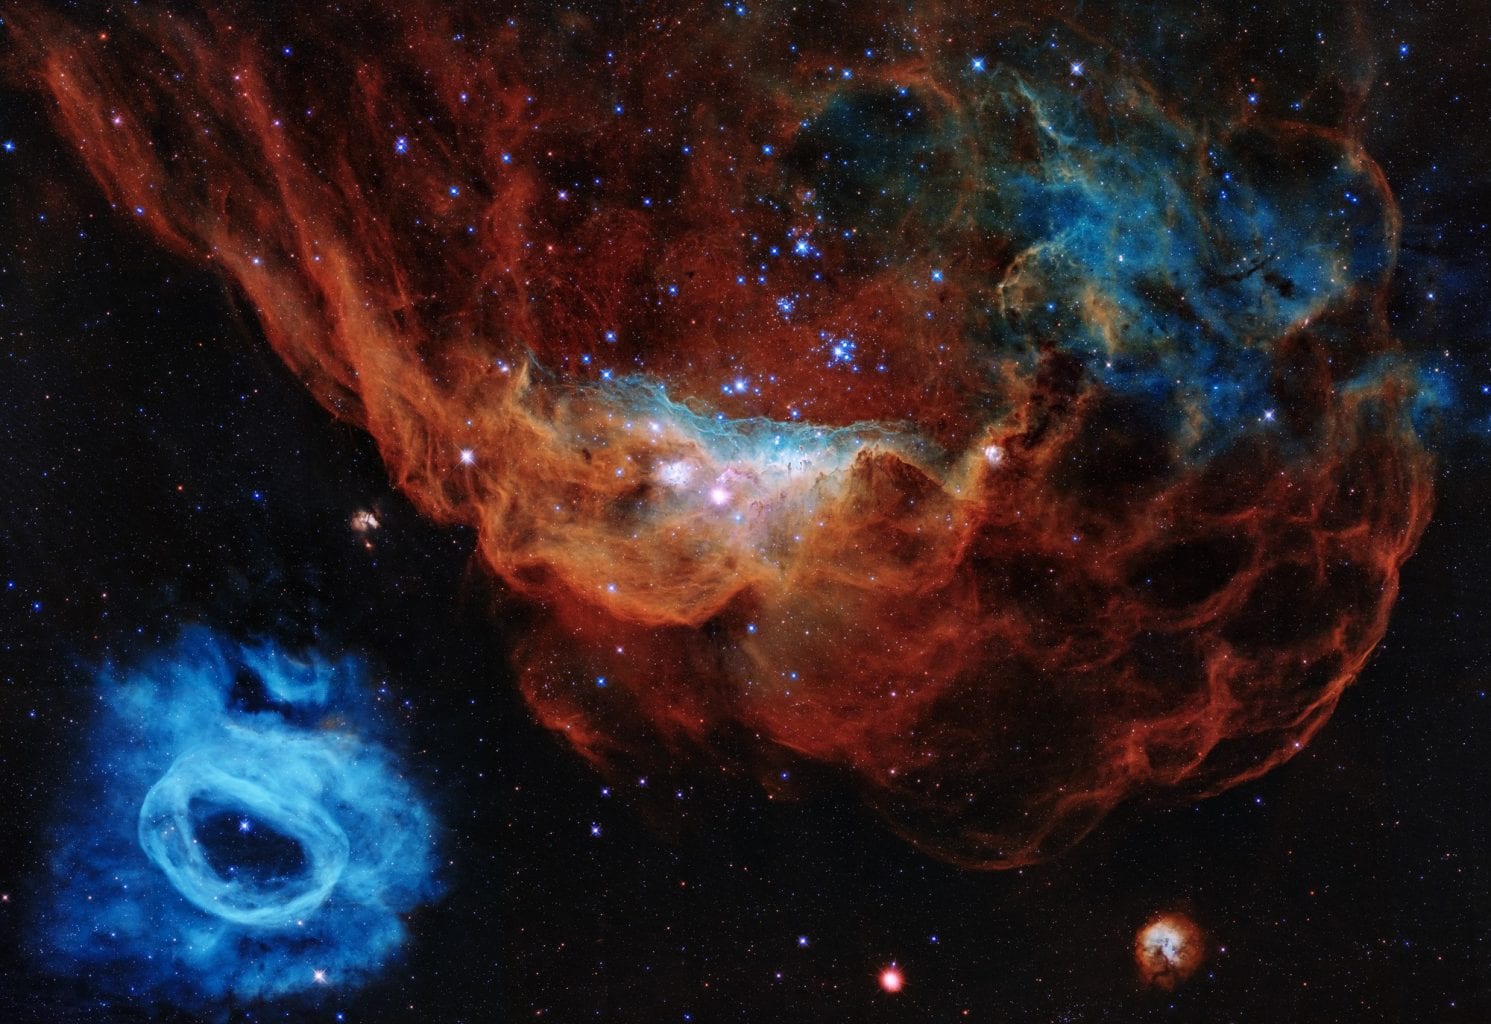 This Hubble portrait shows two nebulas - the giant red NGC 2014 and the blue NGC 2020 which are both in the Large Magellanic Cloud. Credit: NASA, ESA and STScI